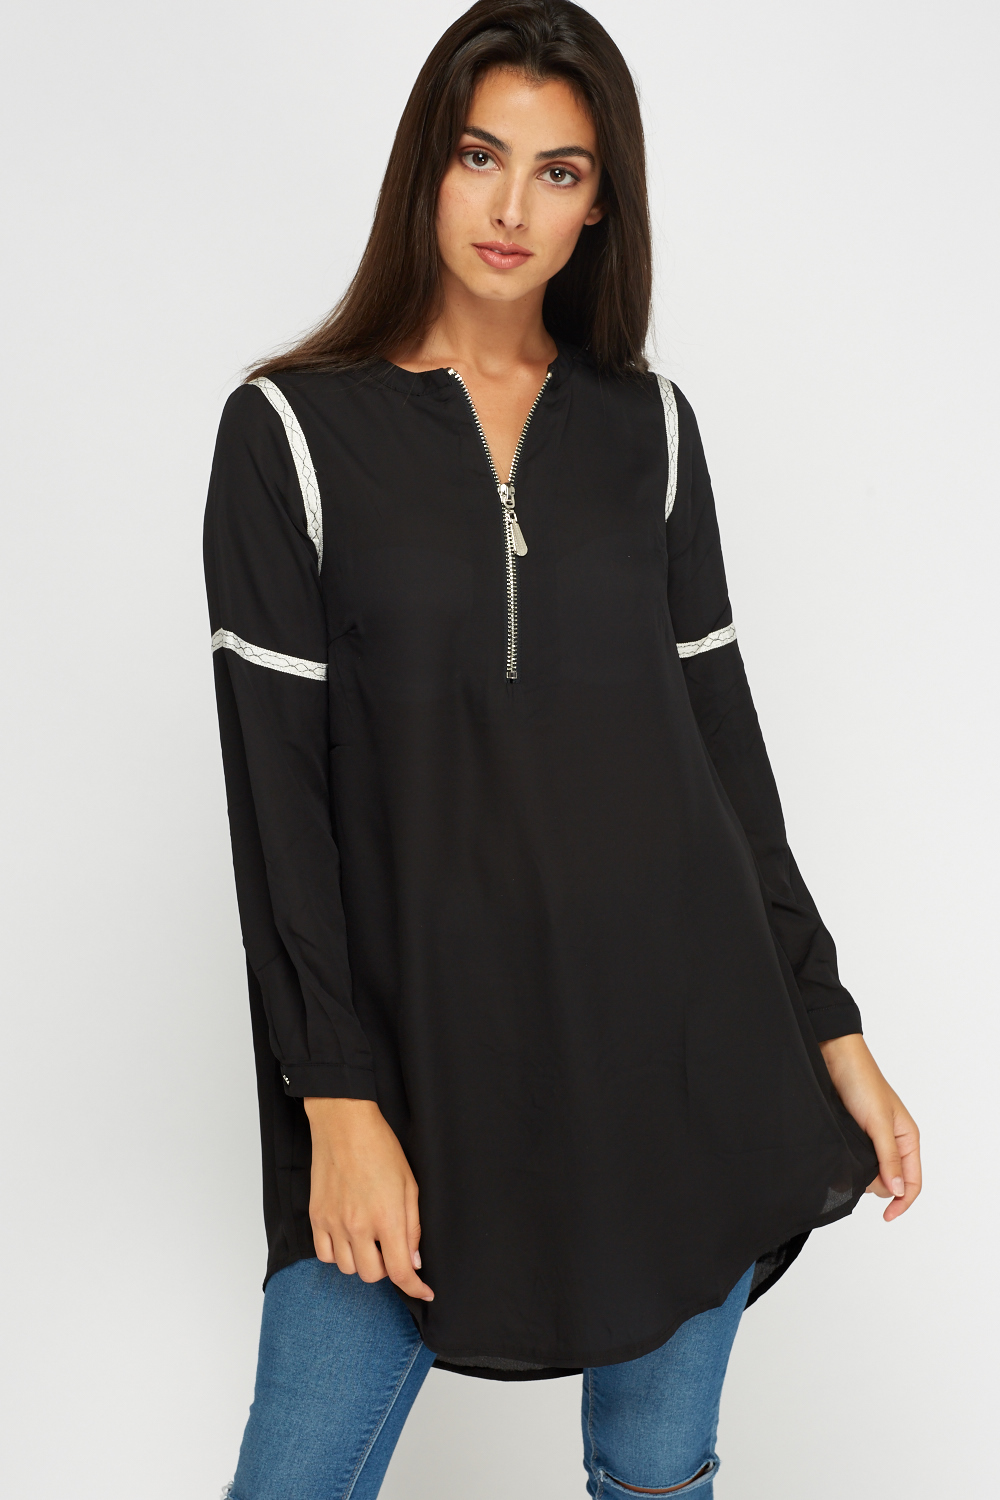 Embroidered Zip Front Tunic Top - Black - Just £5